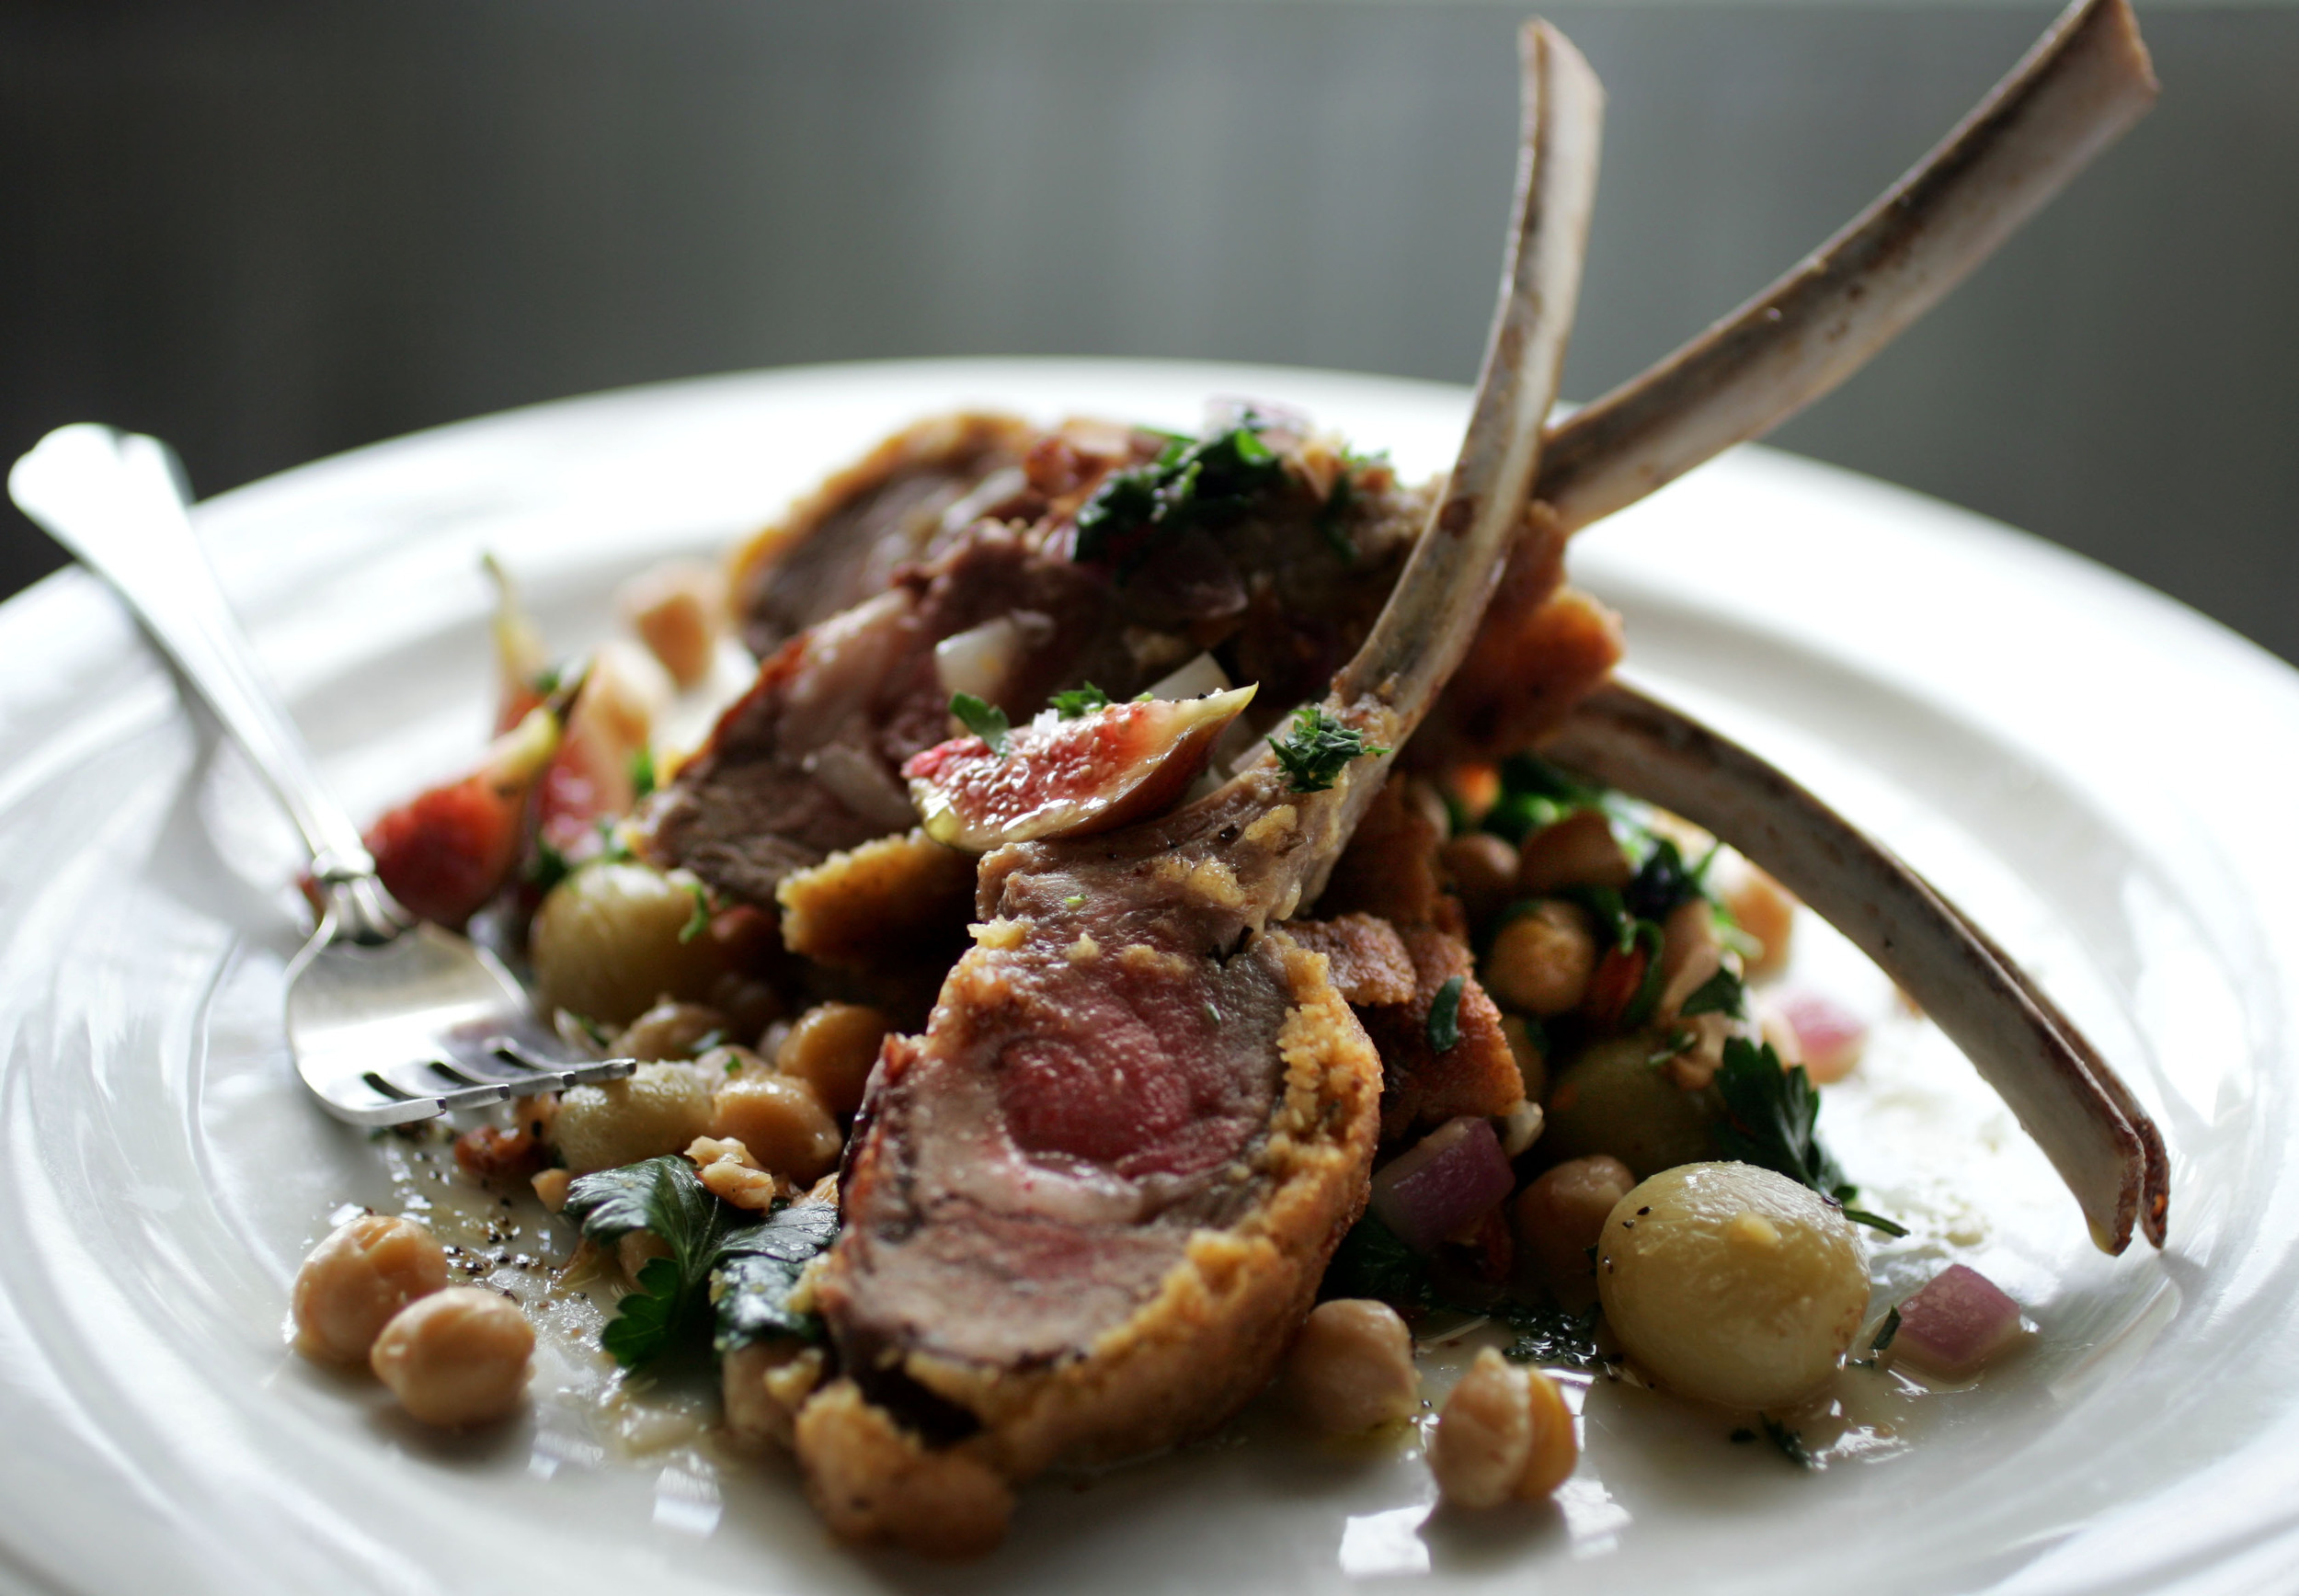  Rack of Lamb, with roasted green grapes, chick peas, toasted almonds, garlic, figs from their garden, red onion and parsley at the Mad Platter Restaurant in Nashville, Tenn. 